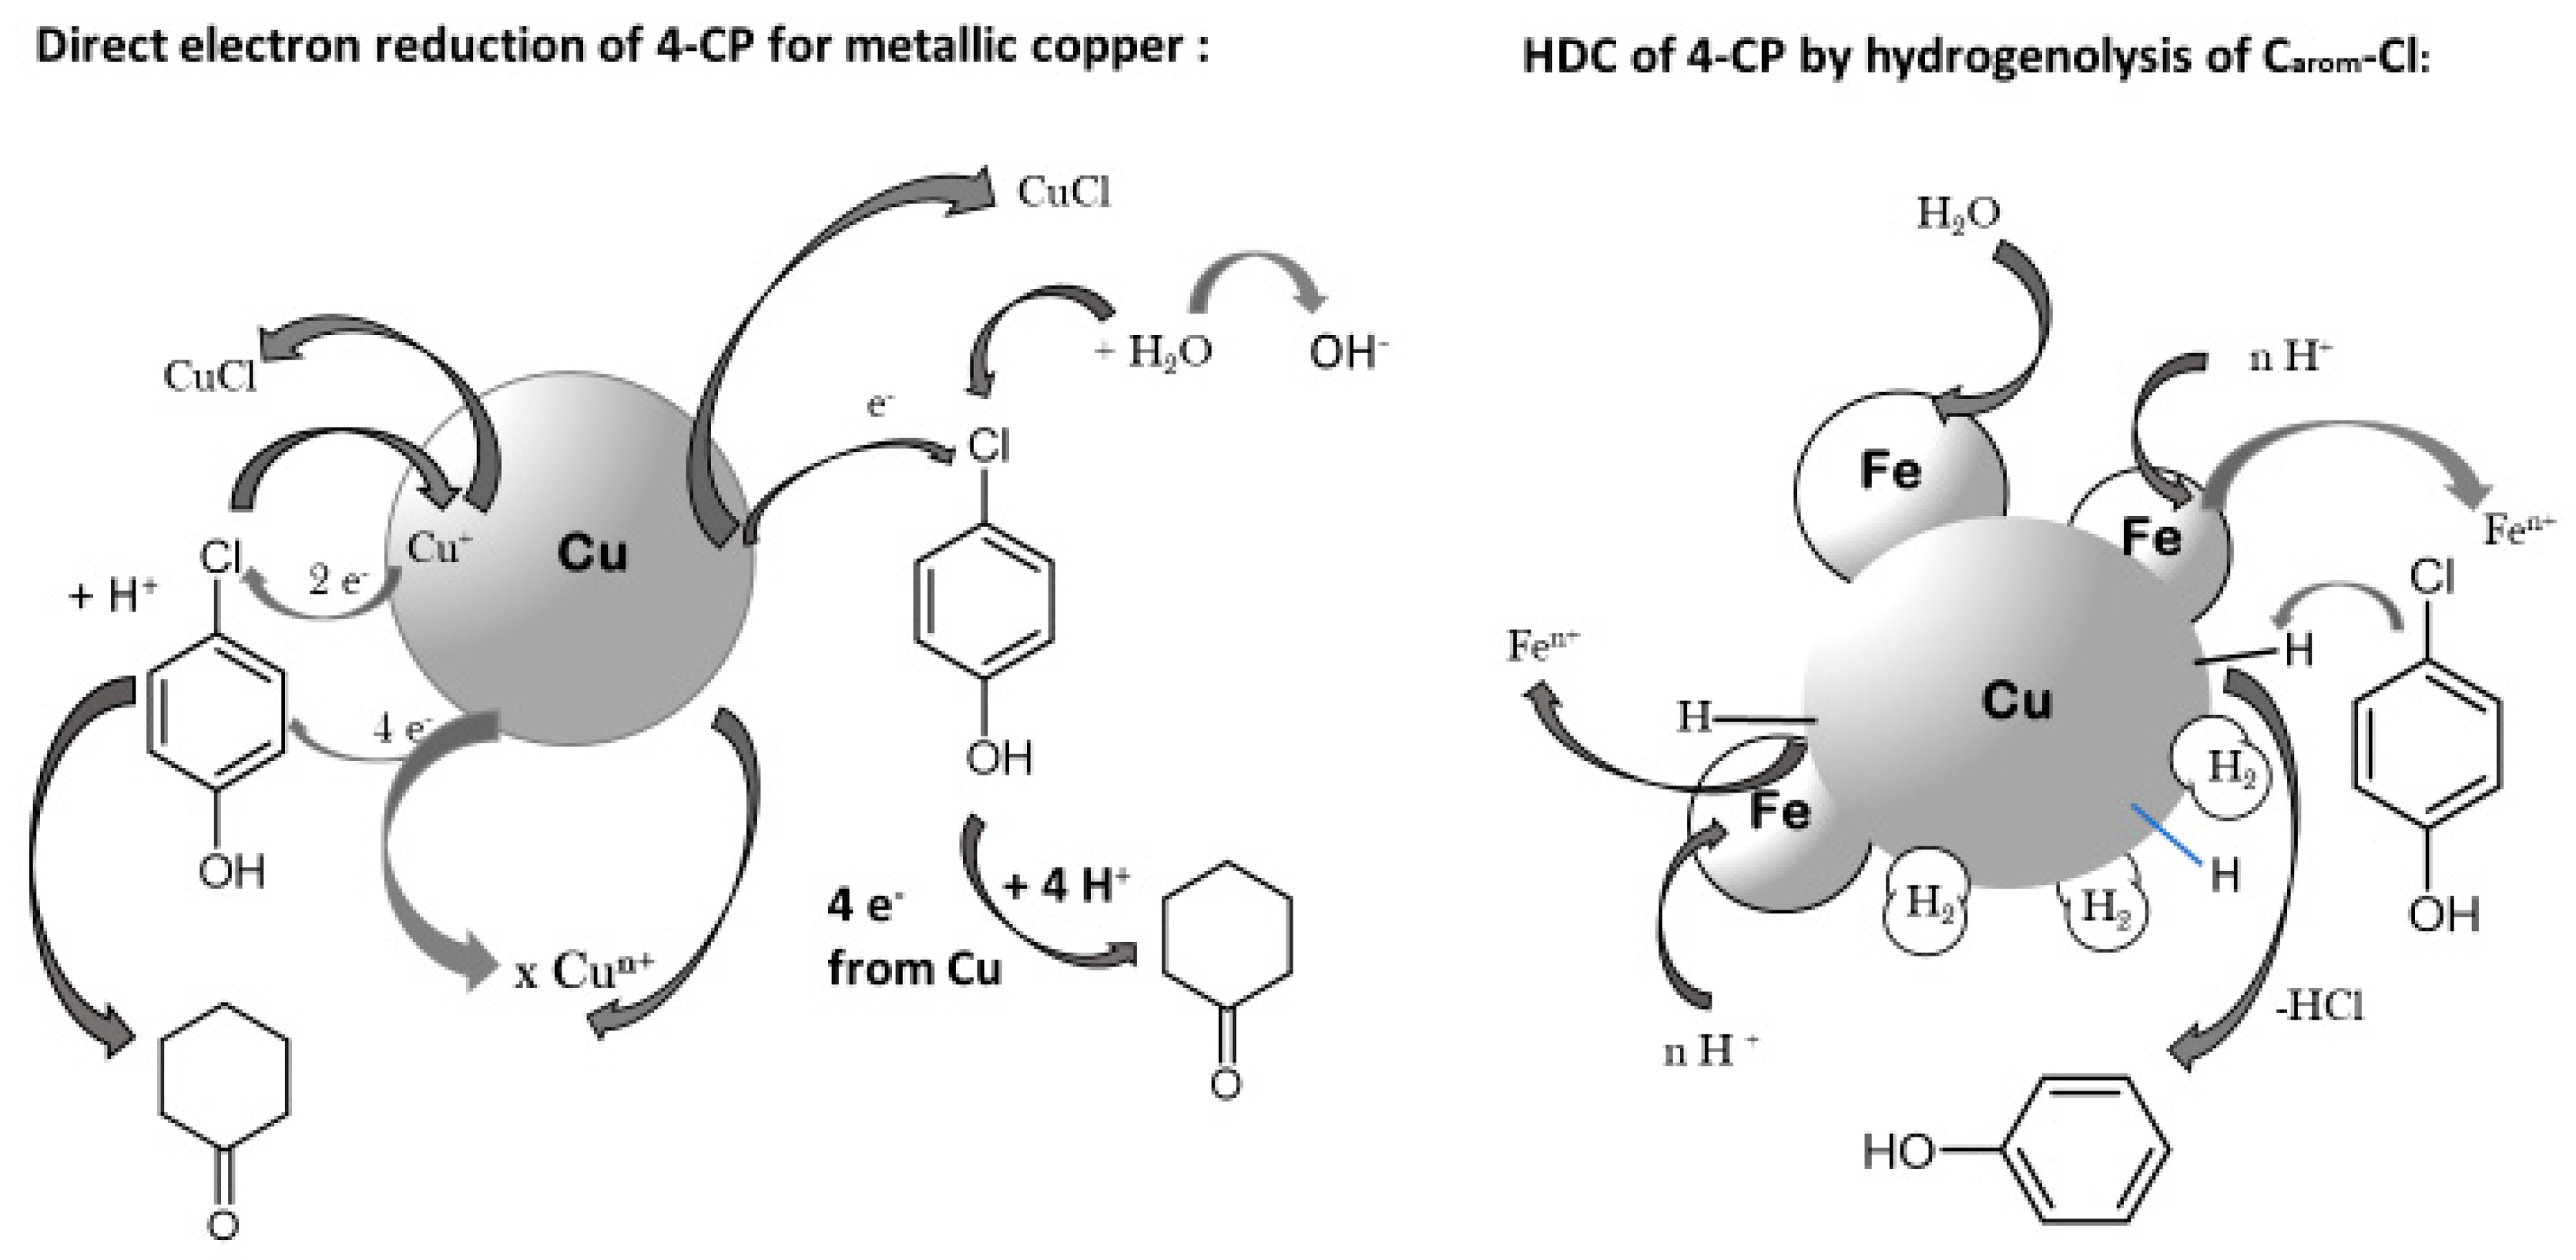 Catalysts Free Full Text The Influence Of Copper On Halogenation Dehalogenation Reactions Of Aromatic Compounds And Its Role In The Destruction Of Polyhalogenated Aromatic Contaminants Html